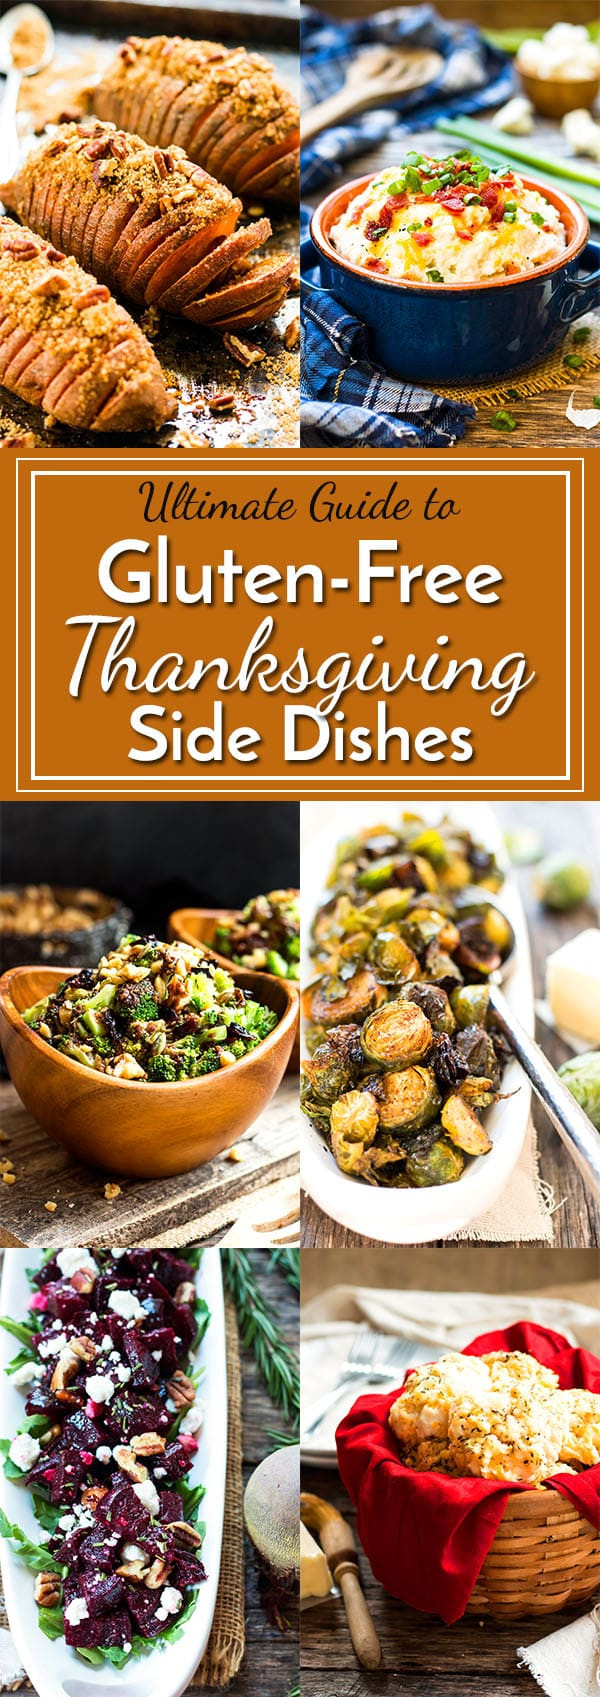 Gluten Free Side Dishes
 The Ultimate Guide to Gluten Free Thanksgiving Side Dishes